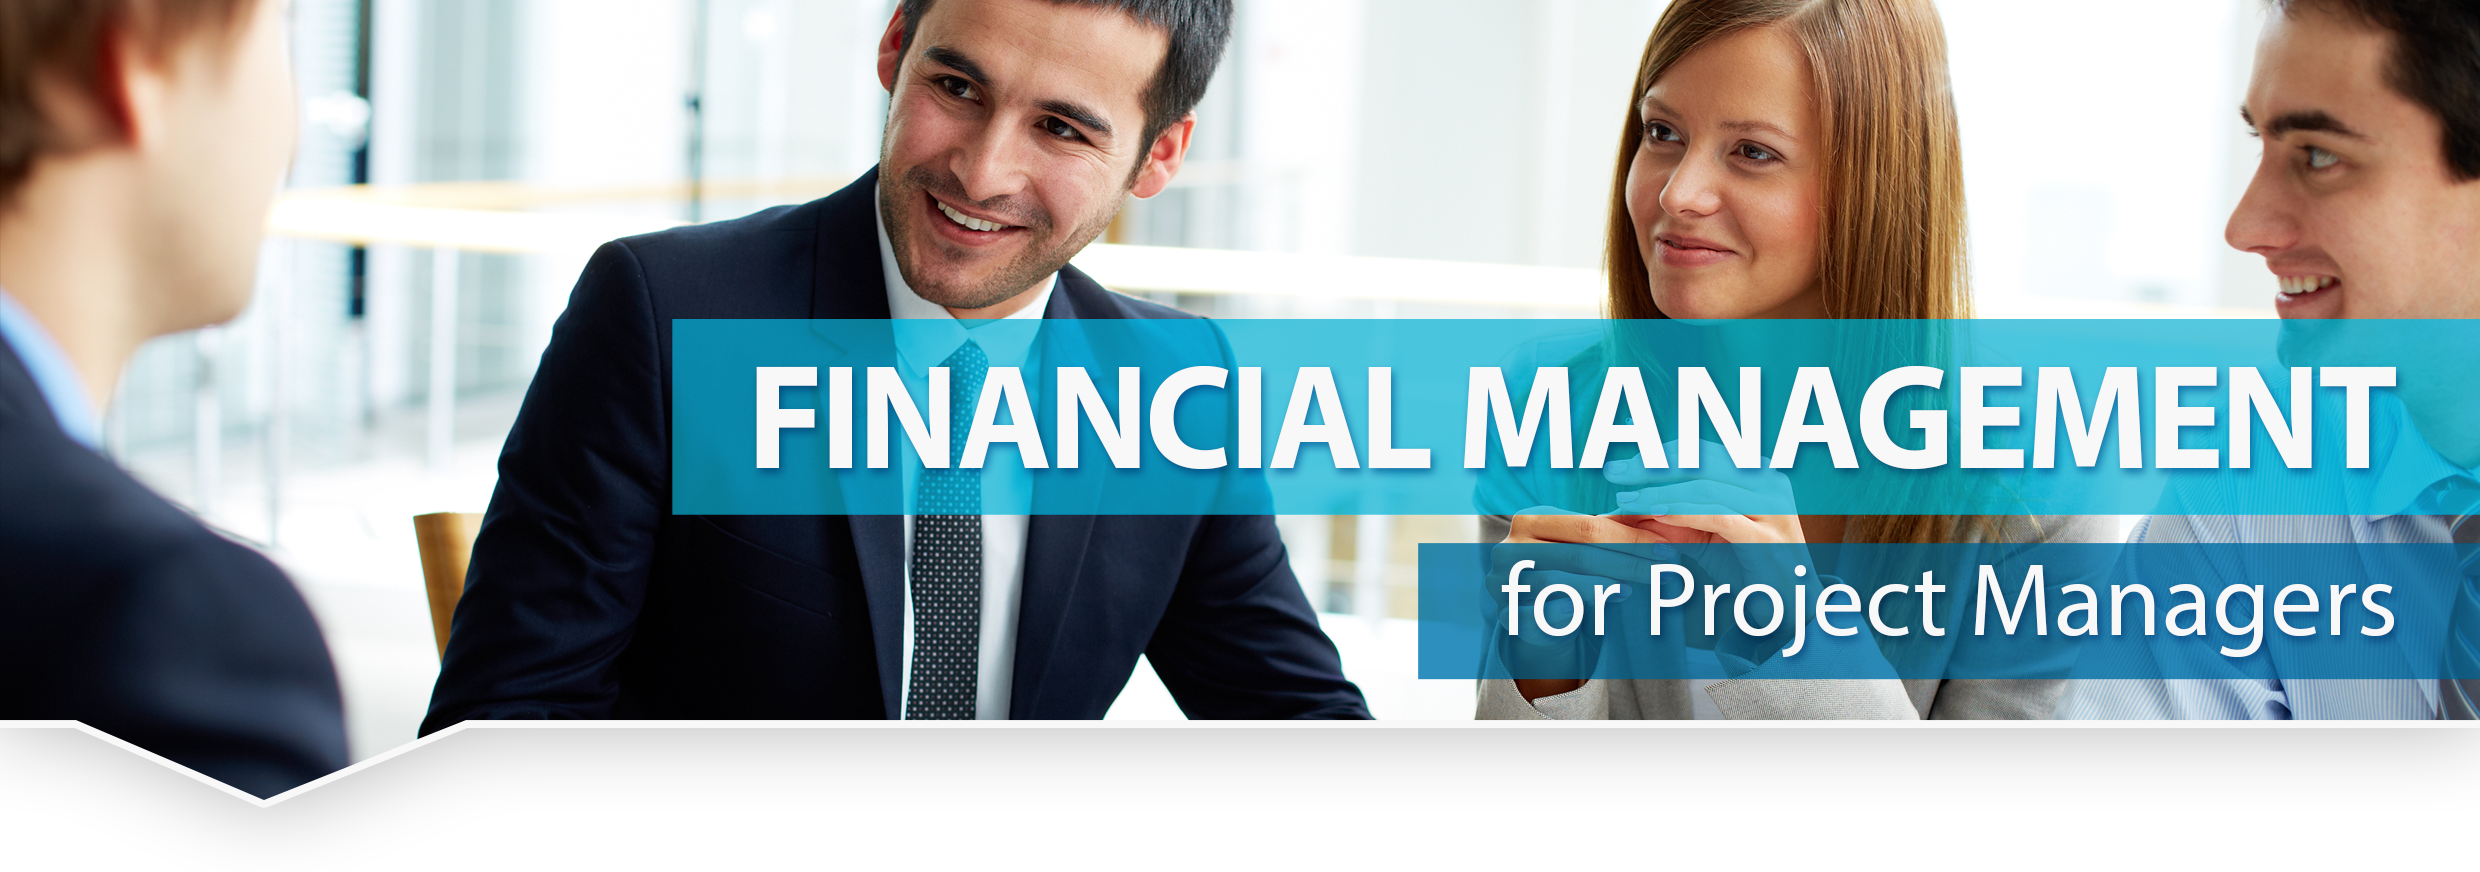 financial management for project managers